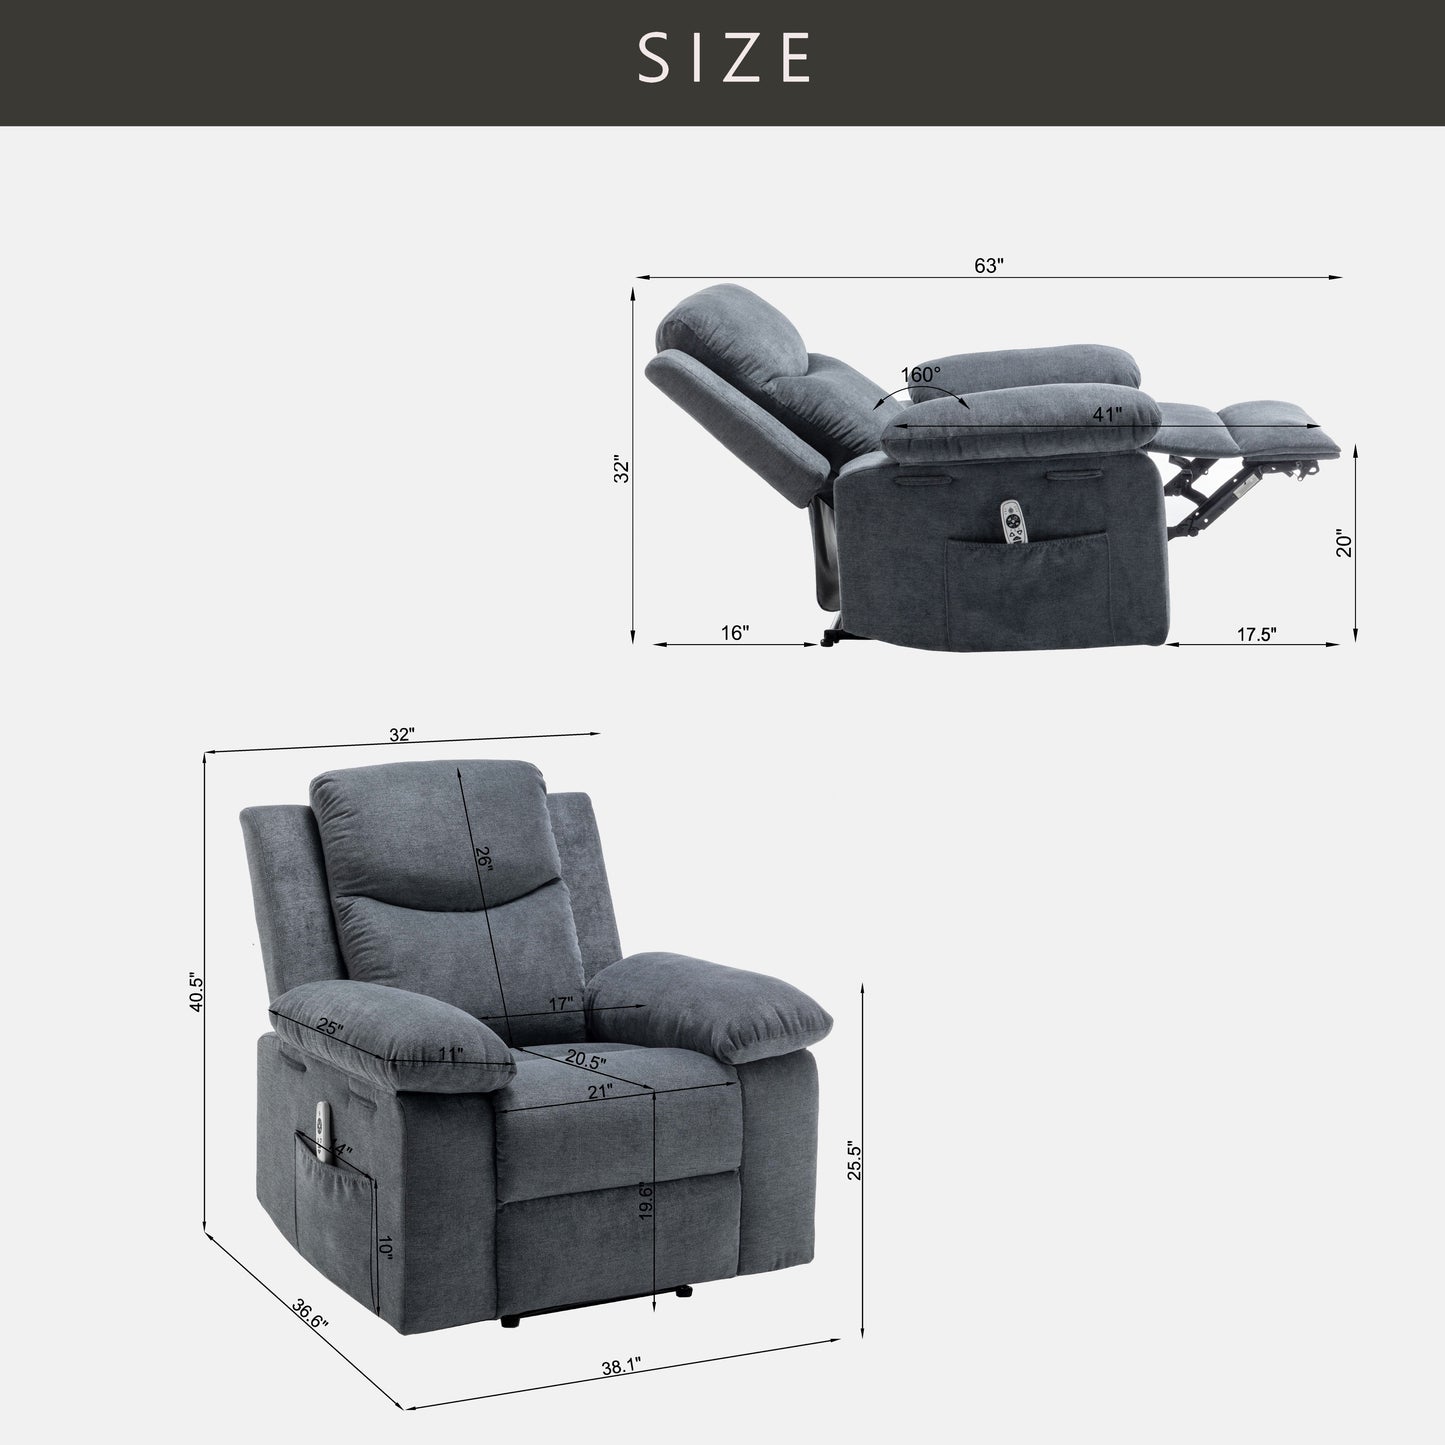 Power Recliner Chair with Adjustable Massage Function, Recliner Chair with
Heating System for Living Room, Dark Gray color fabric